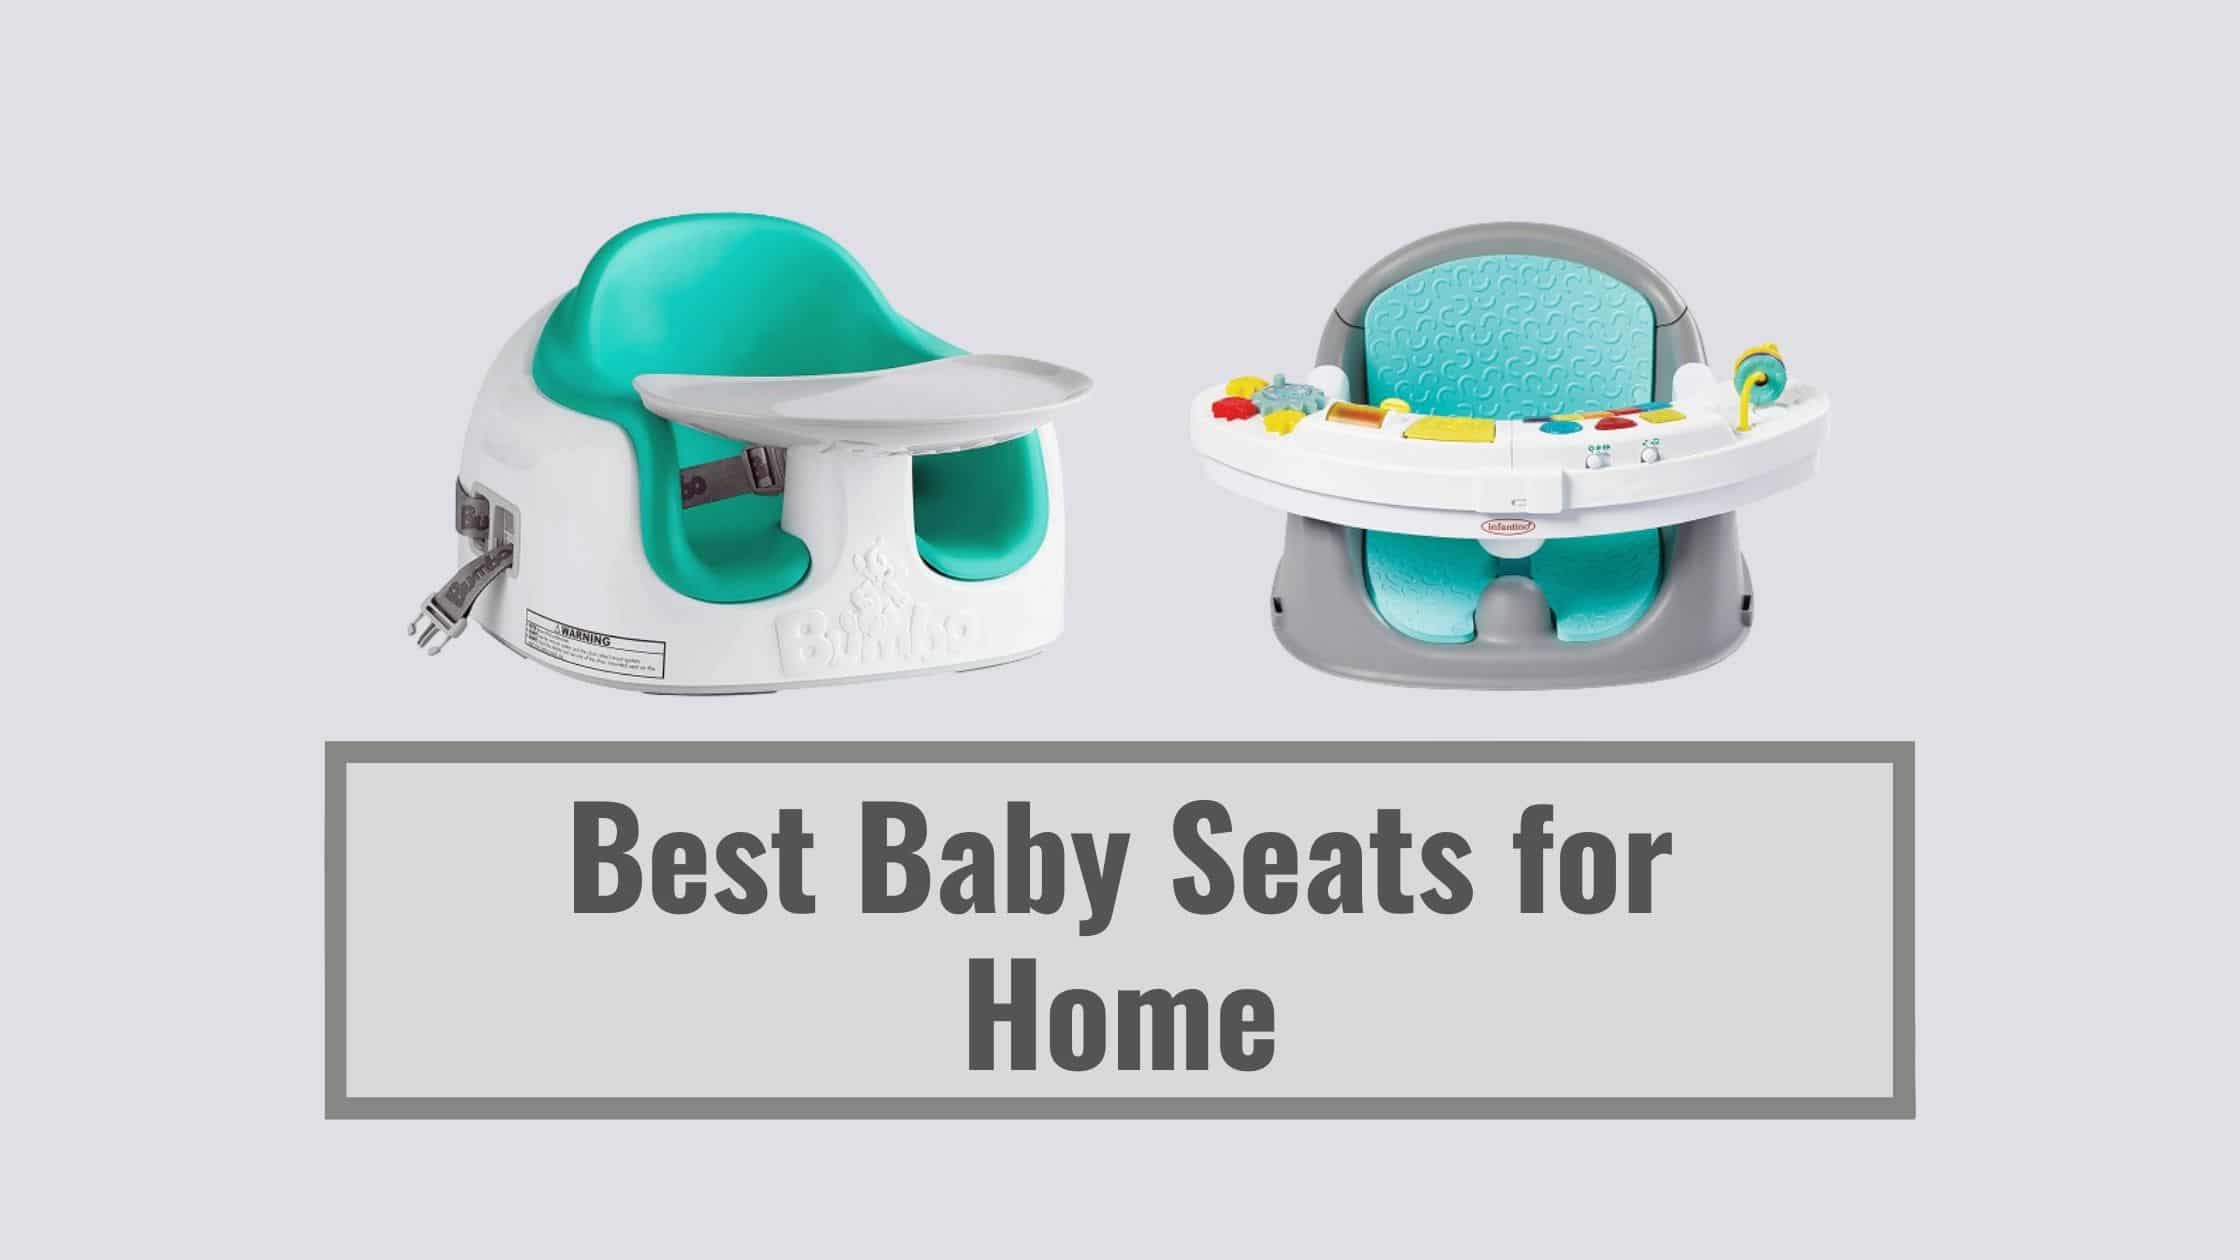 Best Baby Seats for Home